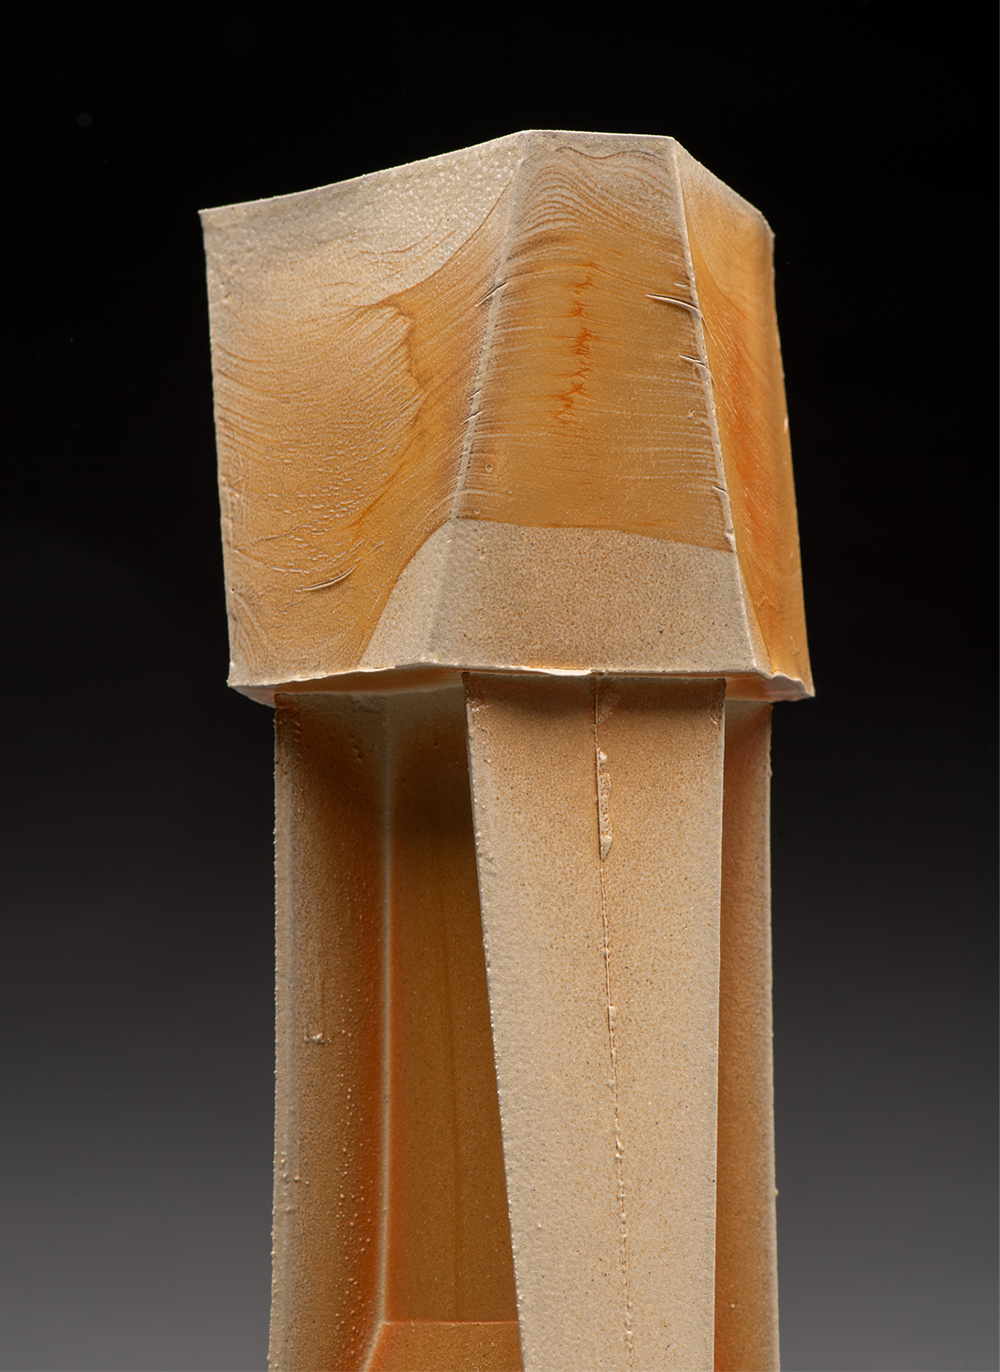 A detailed look at the top of a tall wooden sculpture inspired by industrial architecture.